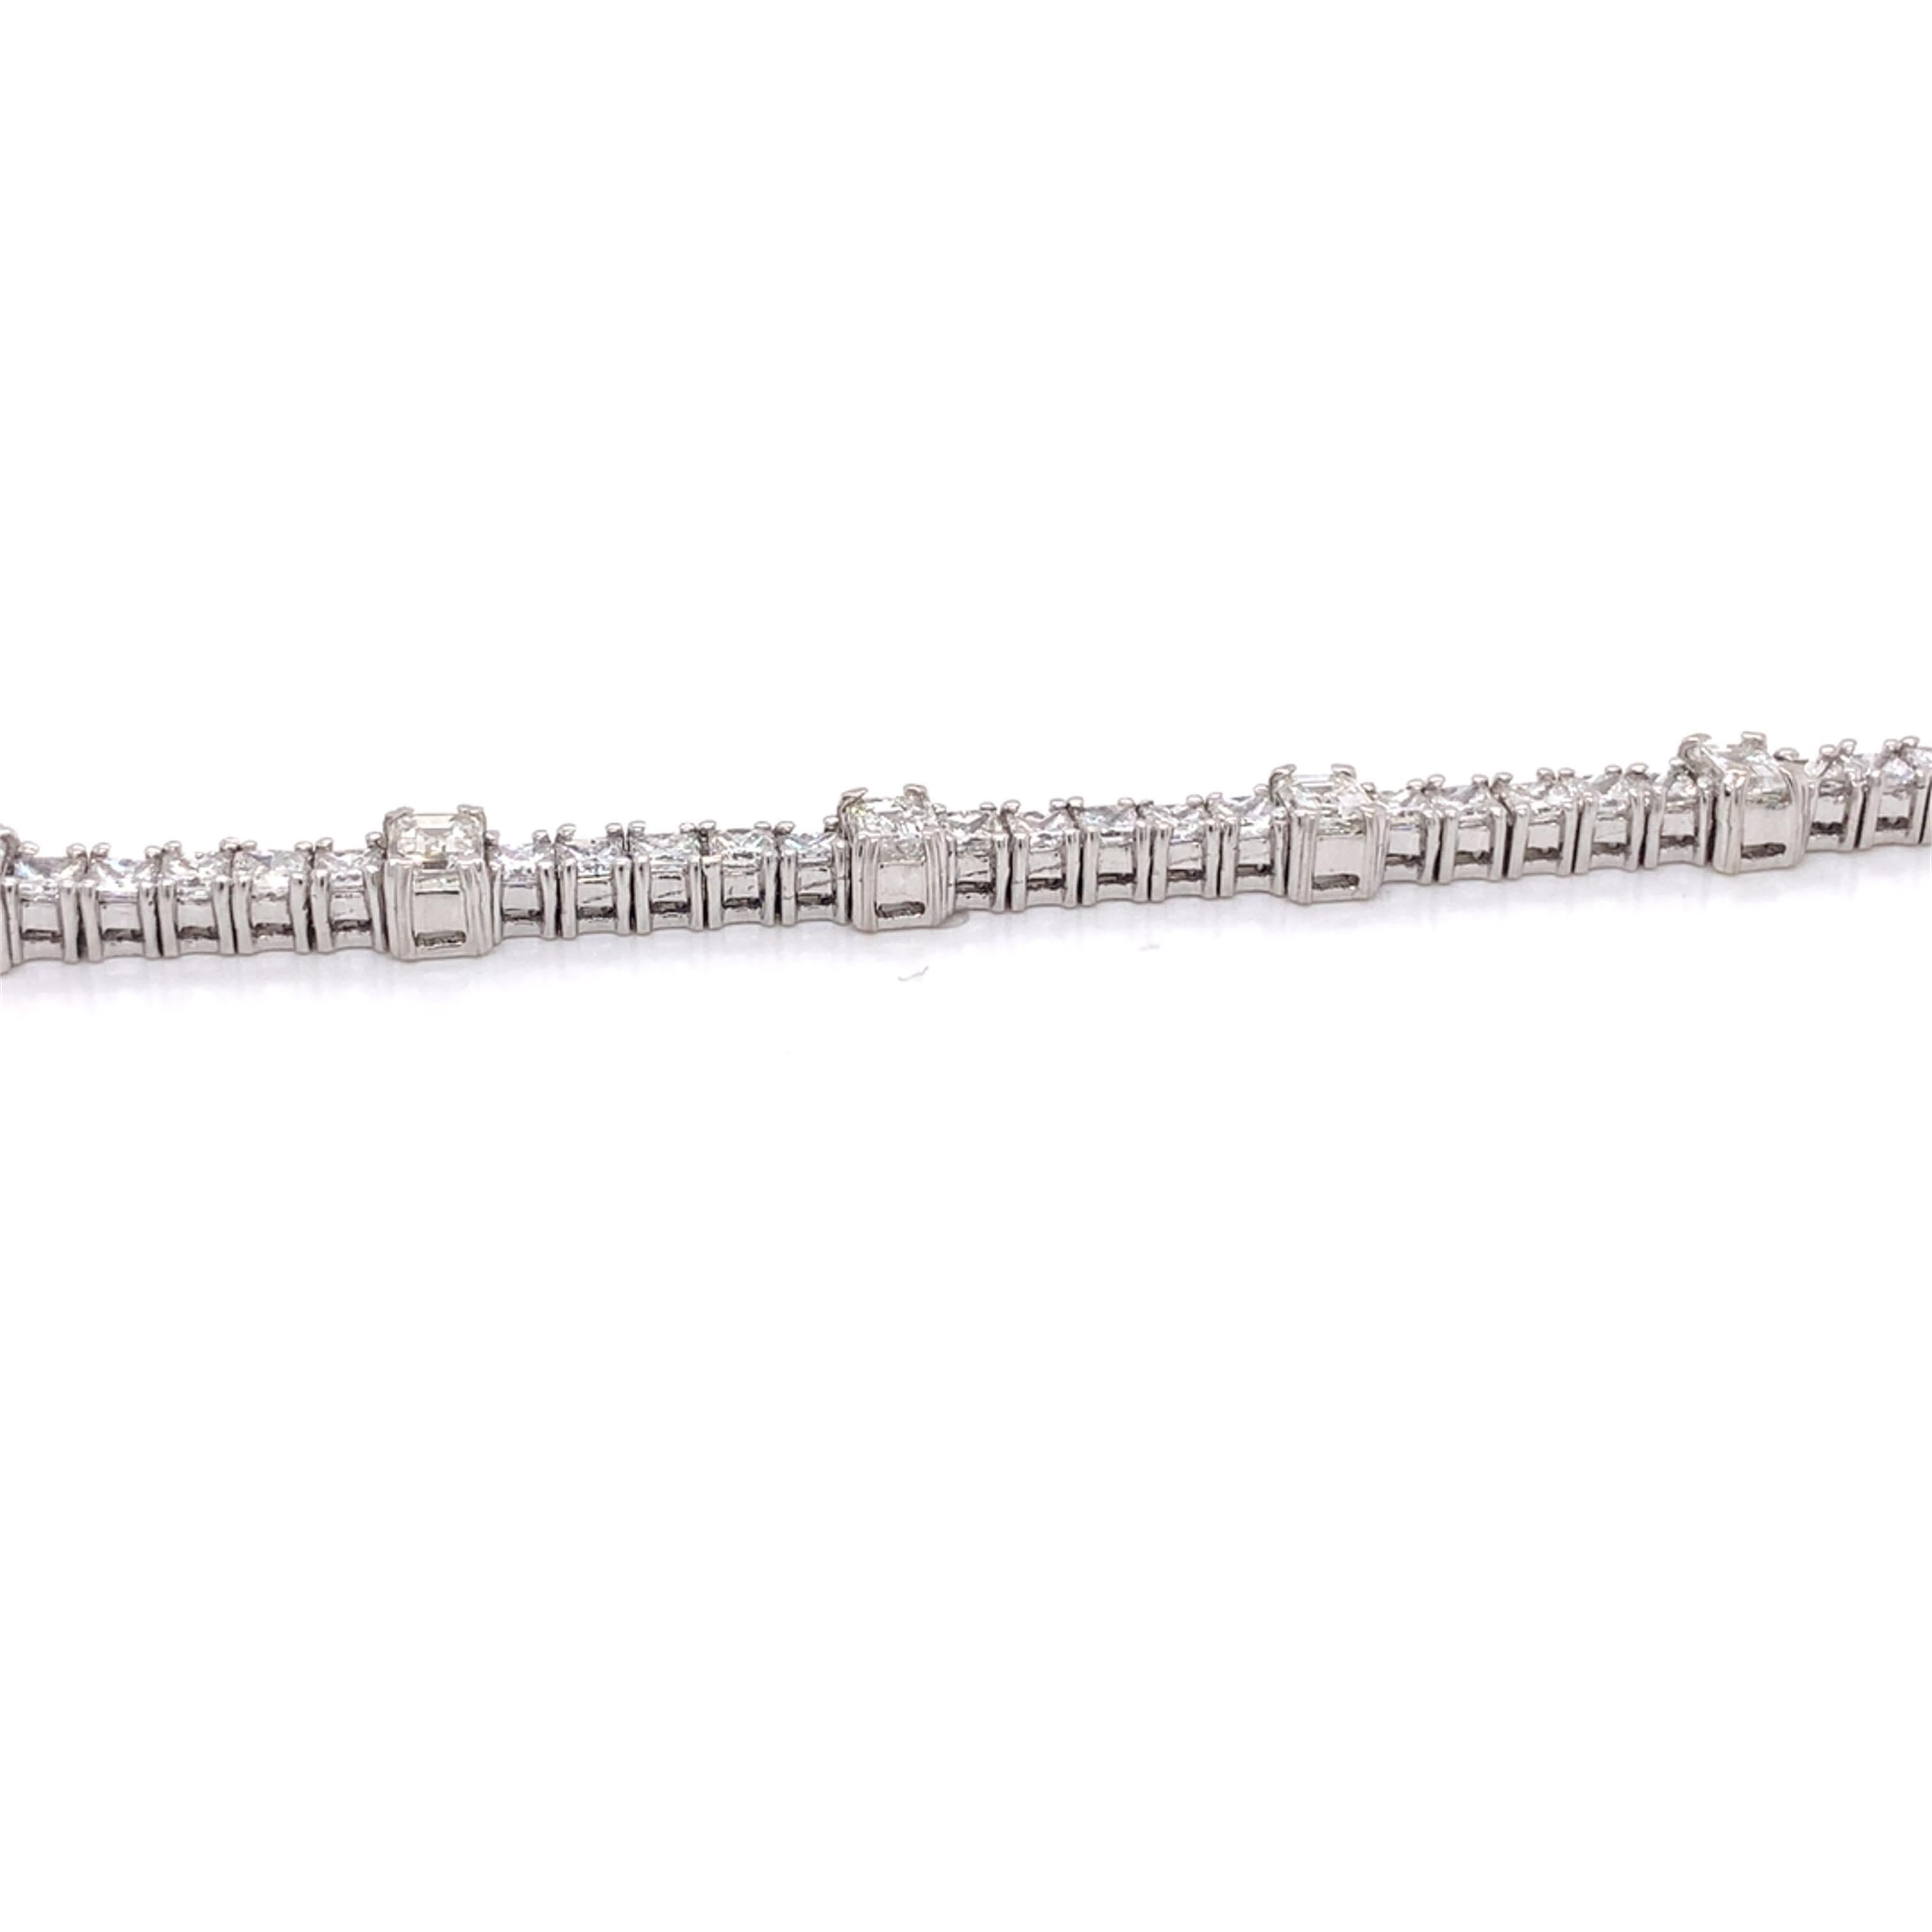 Tennis bracelet made with princess/emerald cut diamonds. Total Diamond Weight: 7.50cts. Diamond Quantity: 65 diamonds (55 princess + 10 emerald cut diamonds). Color: G-H. Clarity: VS. Mounted on 18kt white gold 15.30g. 